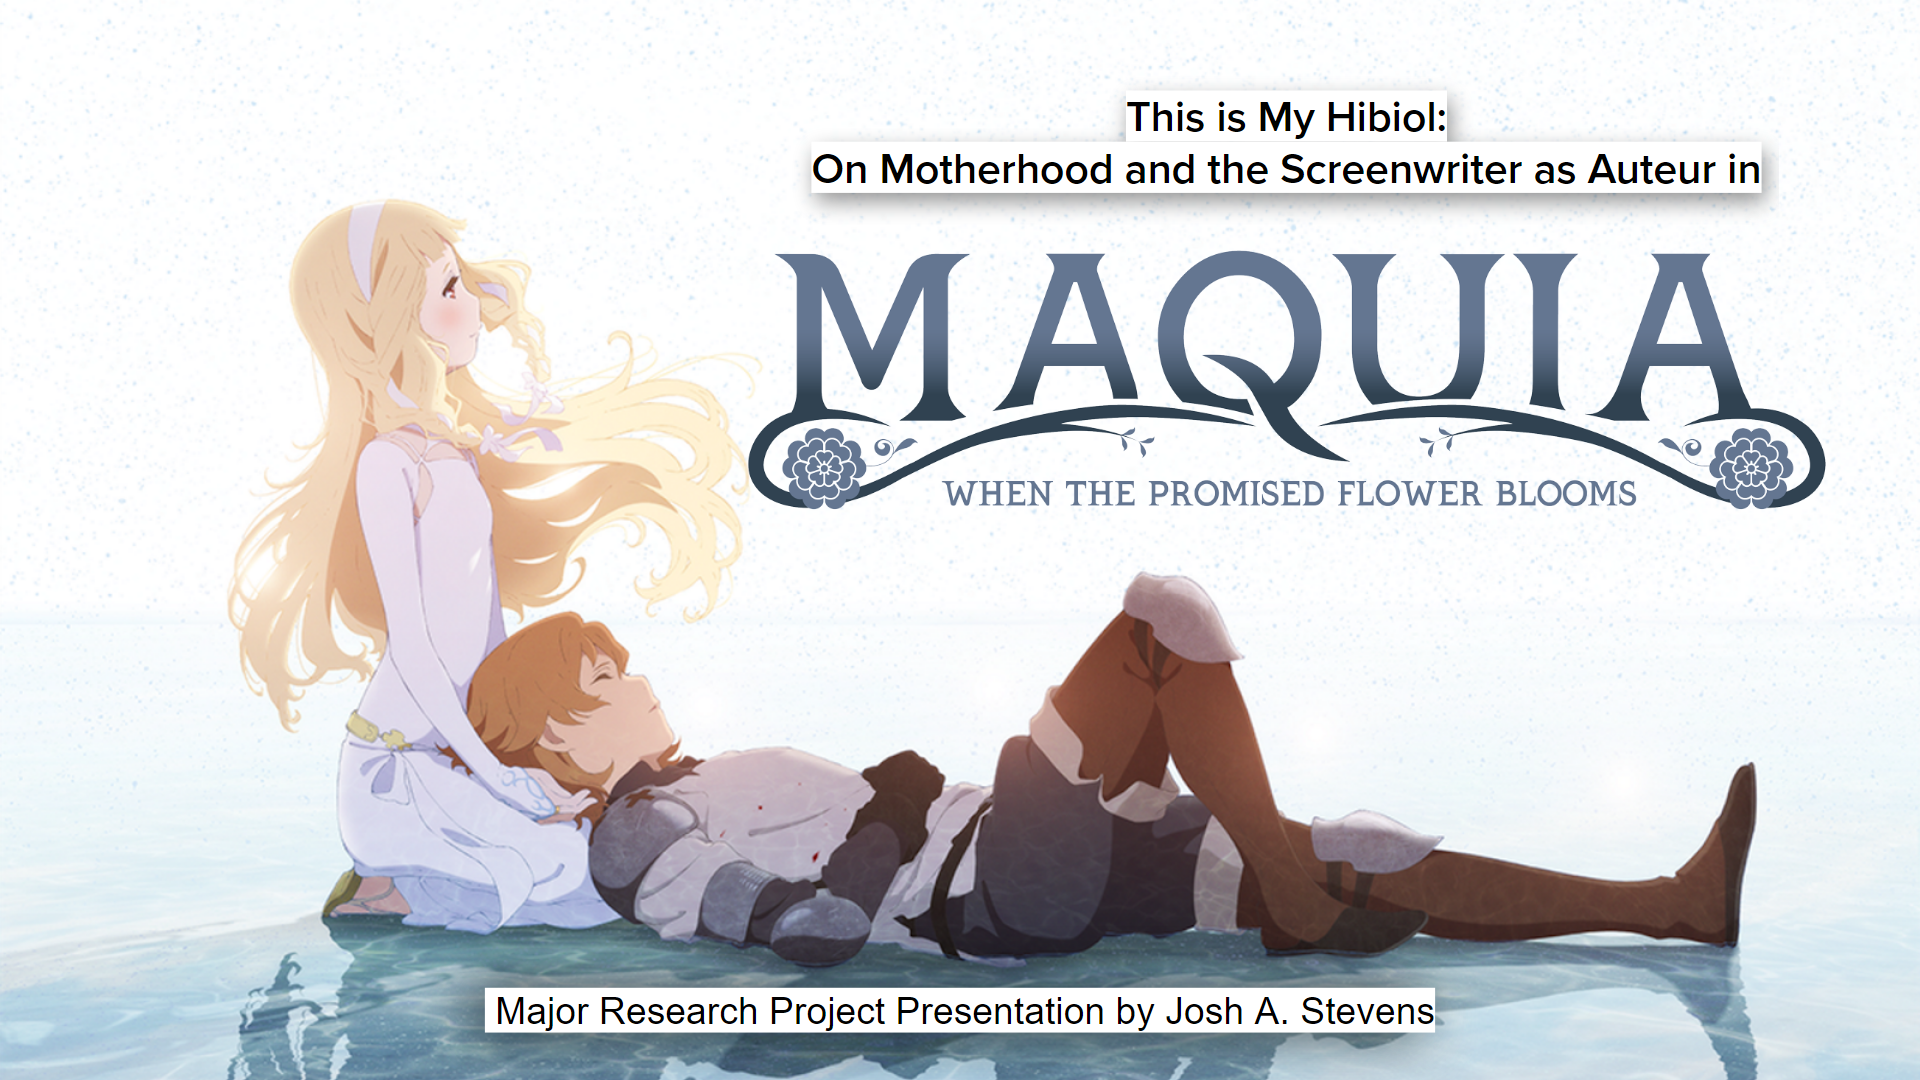 The first slide of my presentation on my dissertation, “This is my Hibiol: On Motherhood and the Screenwriter as Auteur in Maquia: When the Promised Flower Blooms".